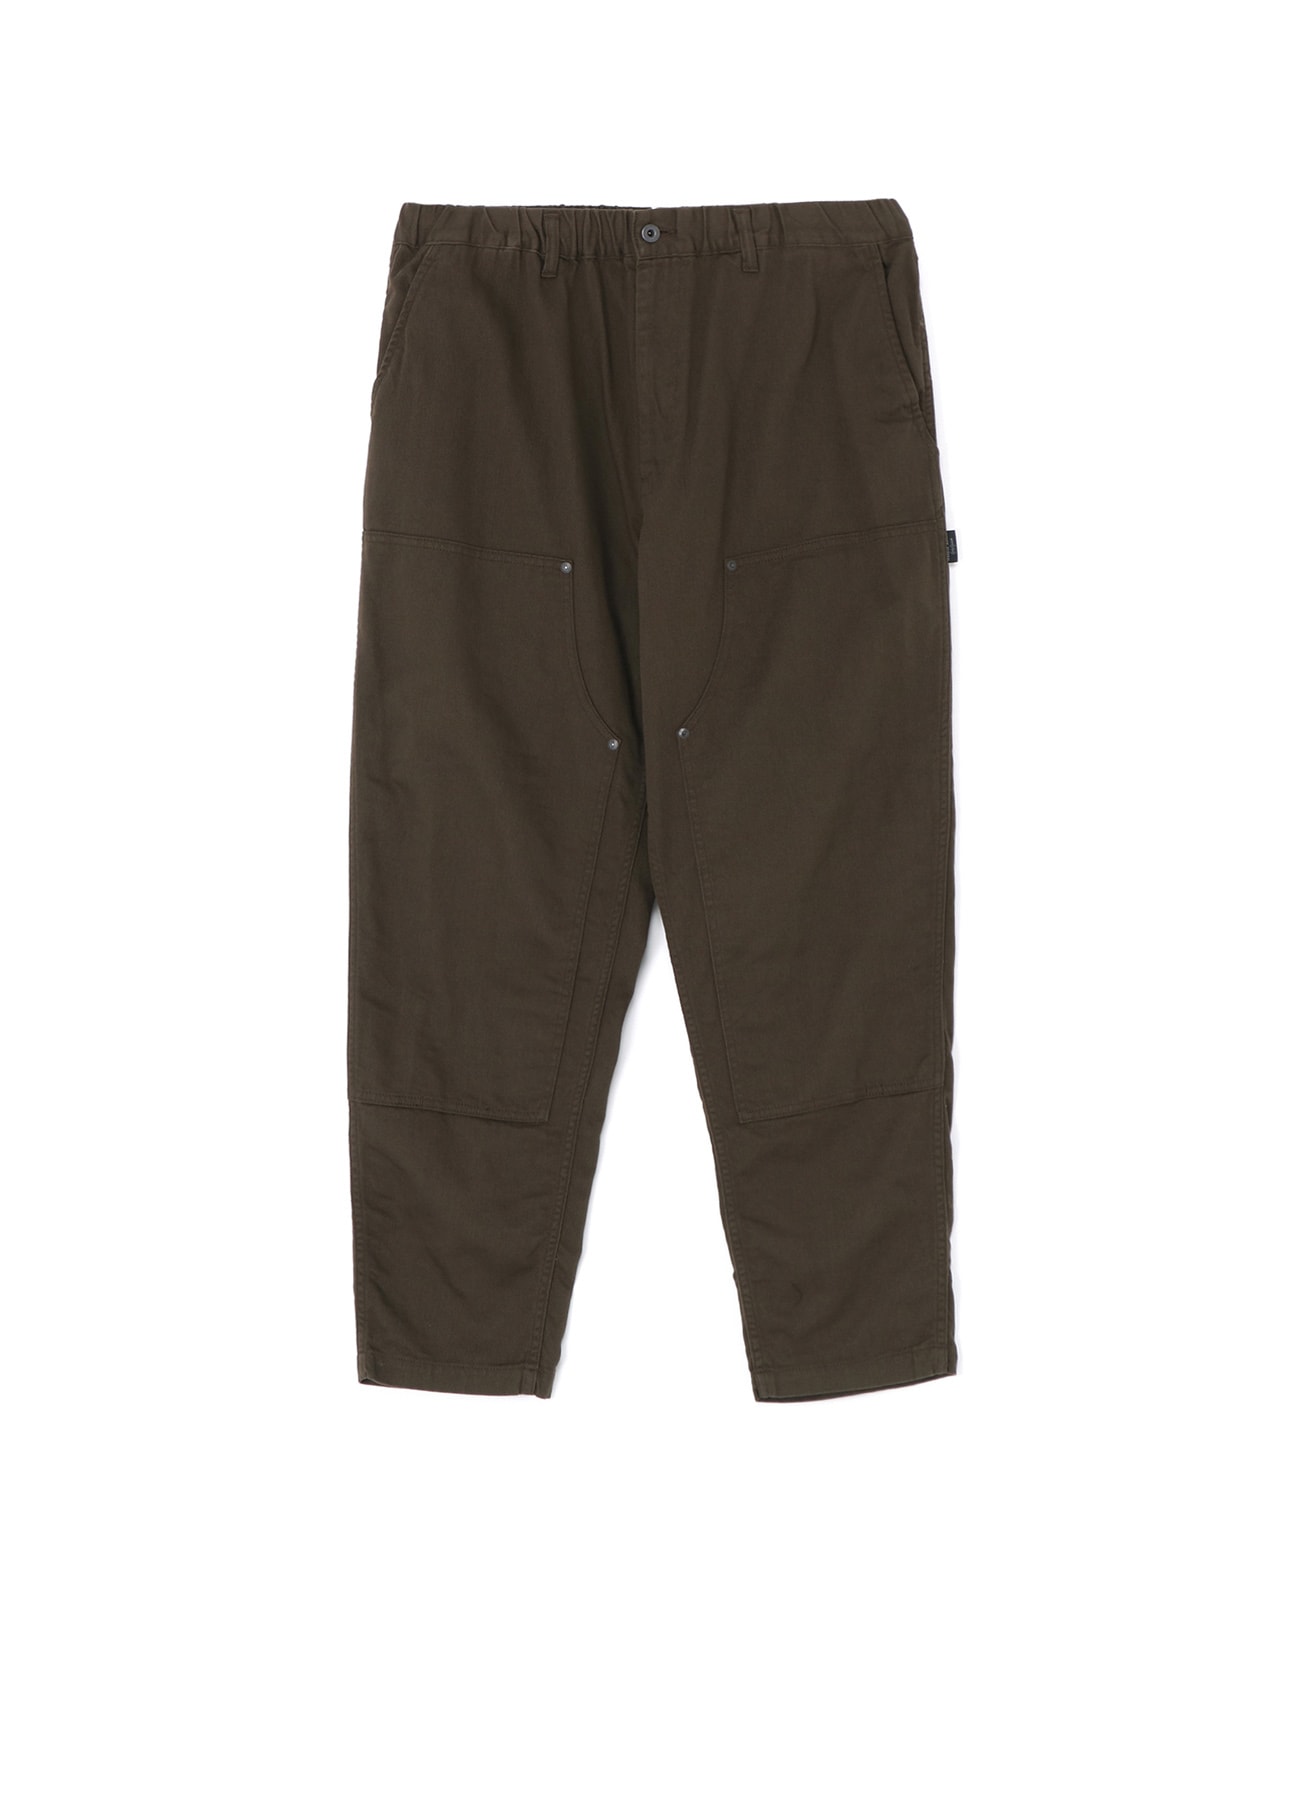 COTTON DRILL ELASTICATED WORK PANTS